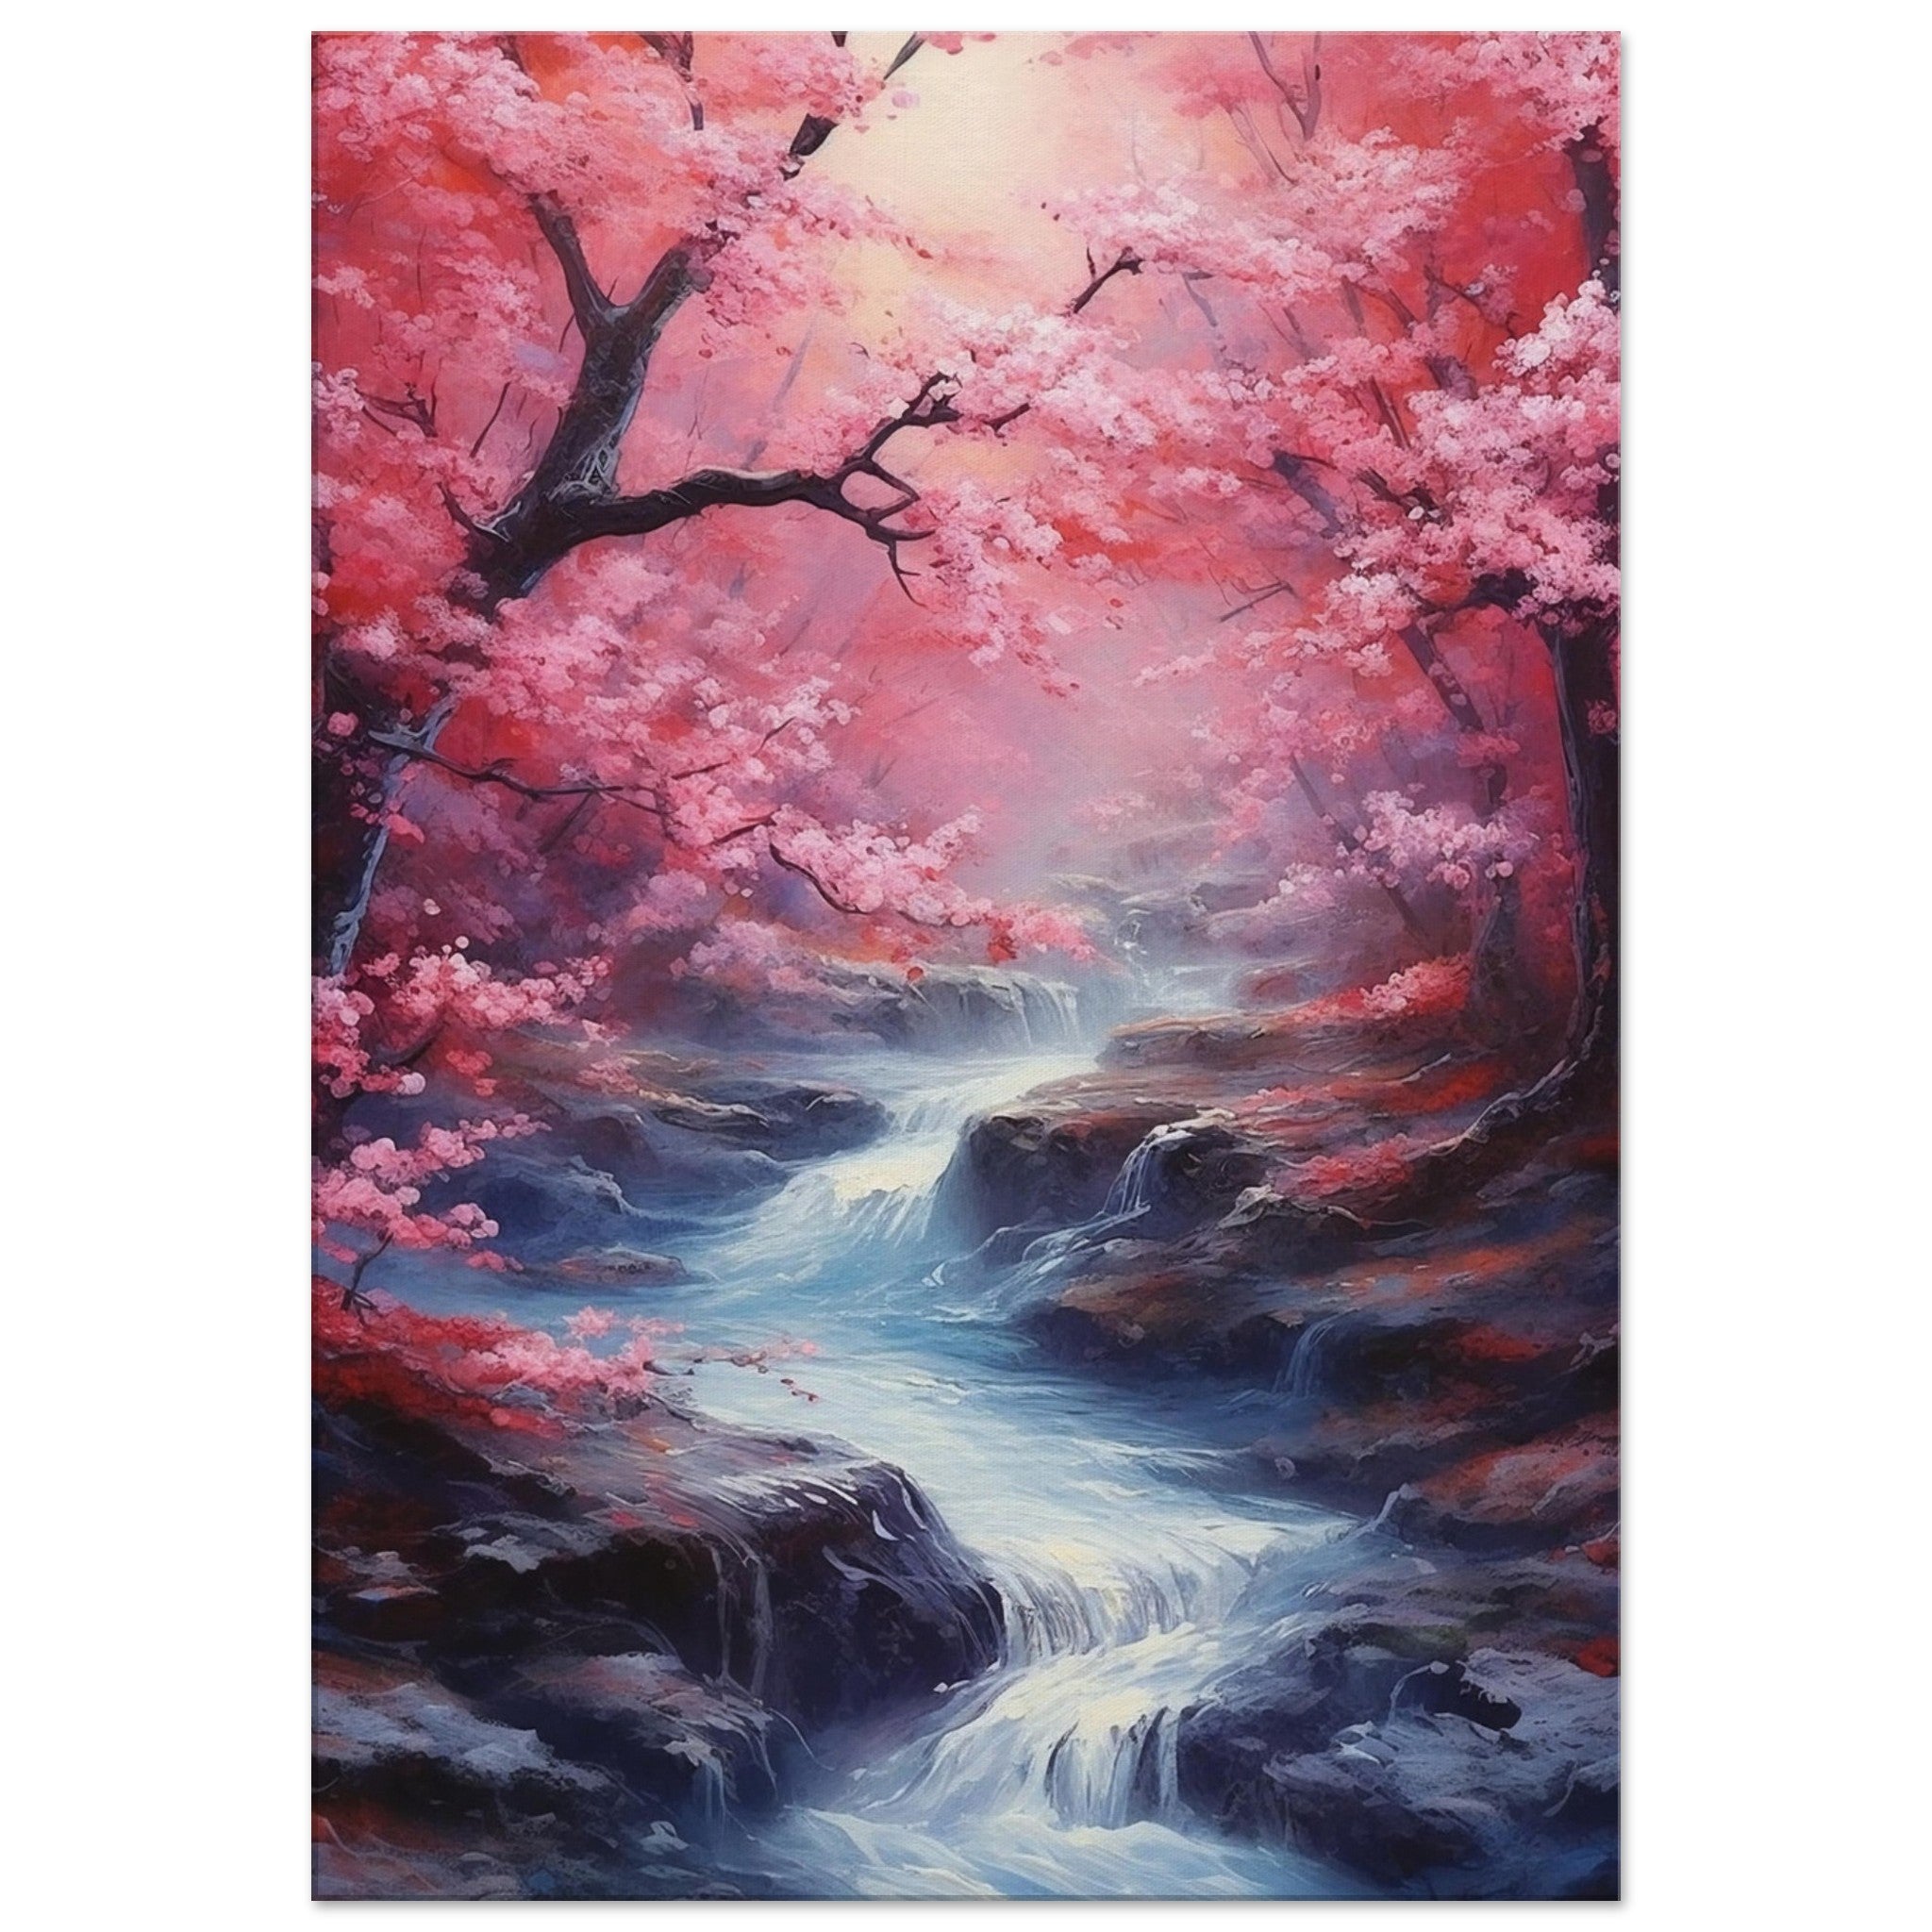 A river flowing through cherry blossom jungle - immersiarts